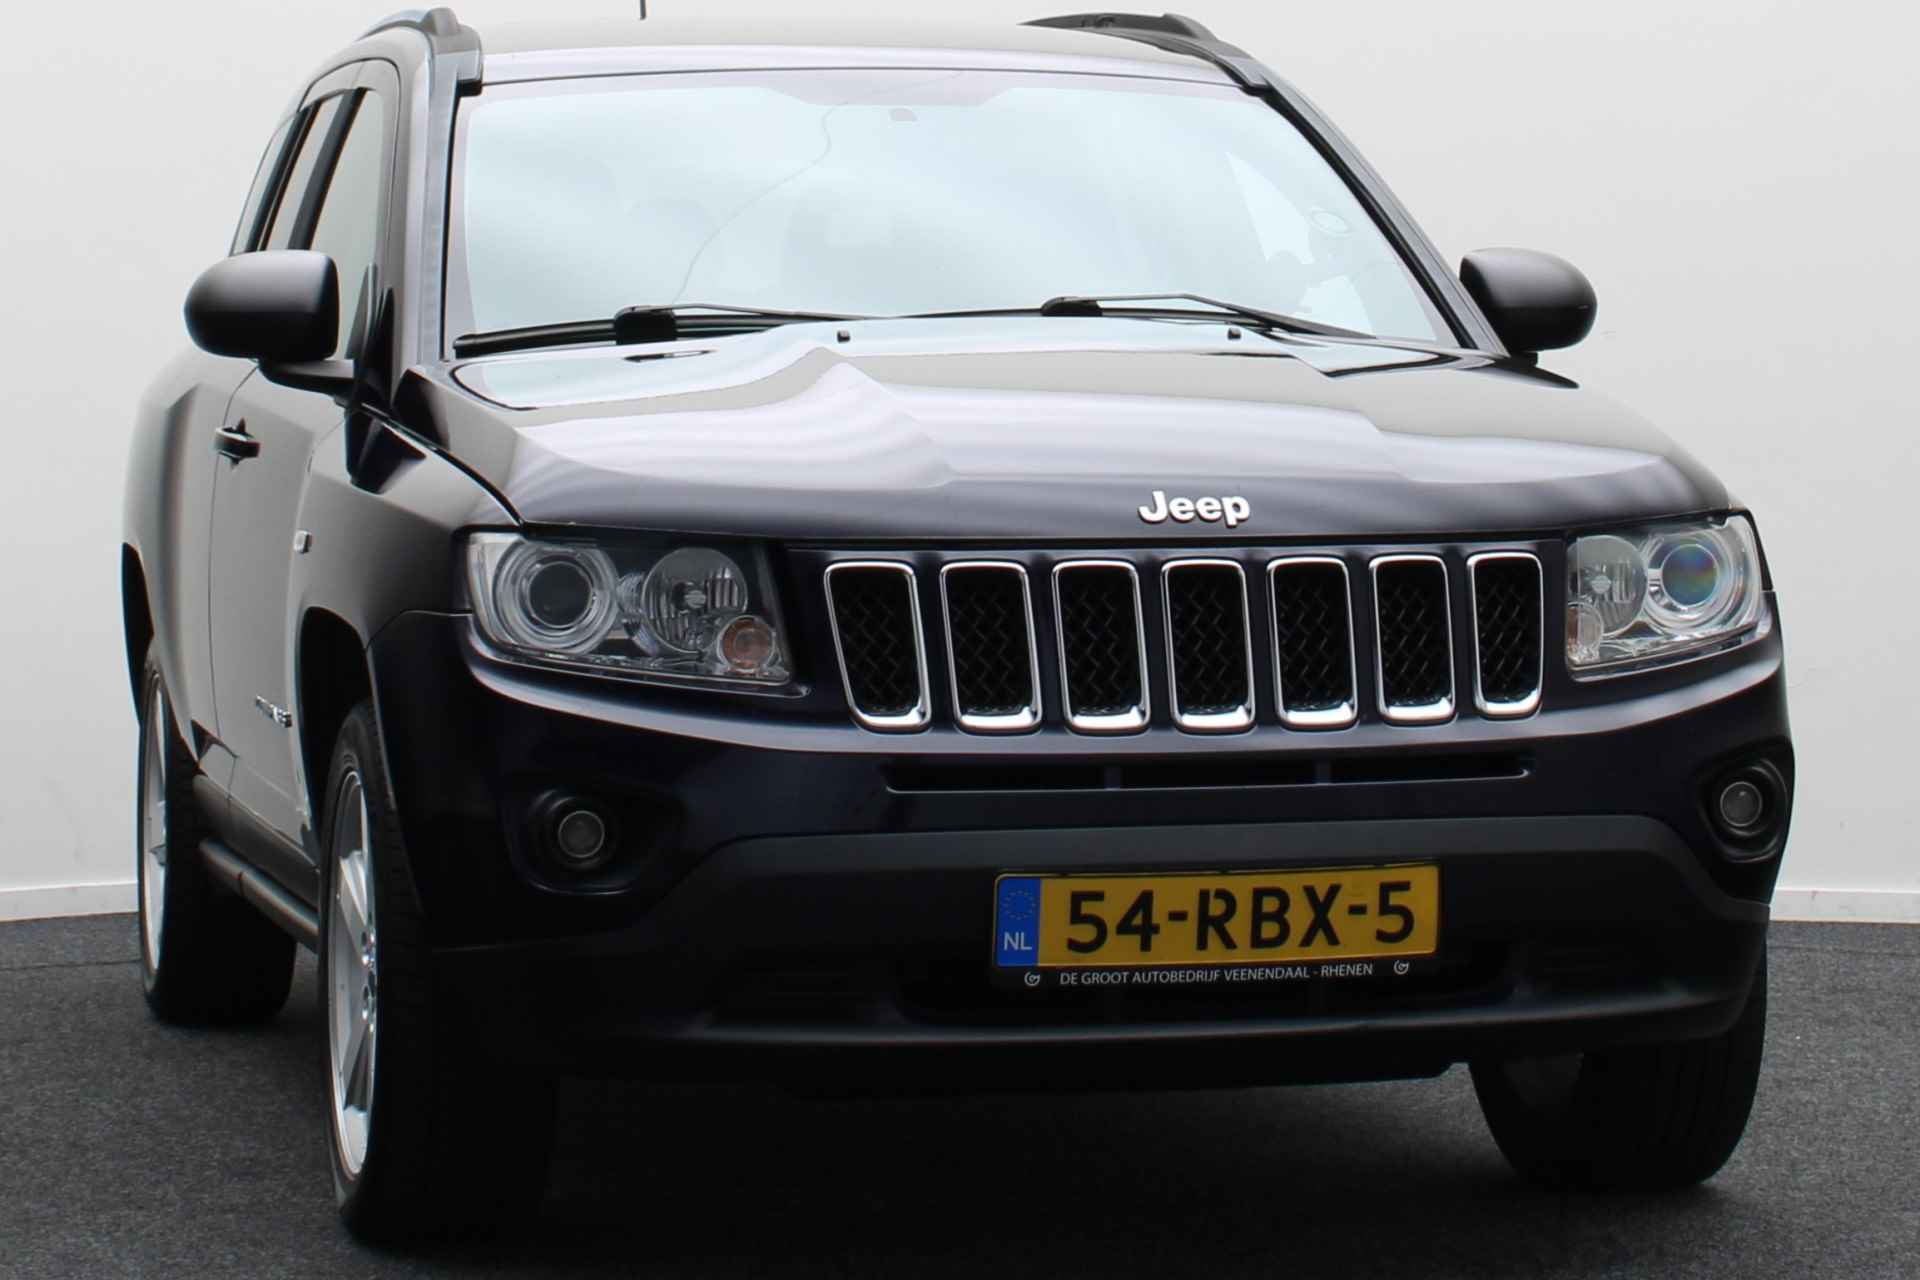 Jeep Compass 2.4 Limited 4WD Automaat Leer, Stoelverw., Climate, Cruise, Navigatie, Bluetooth, 18'' - 20/36